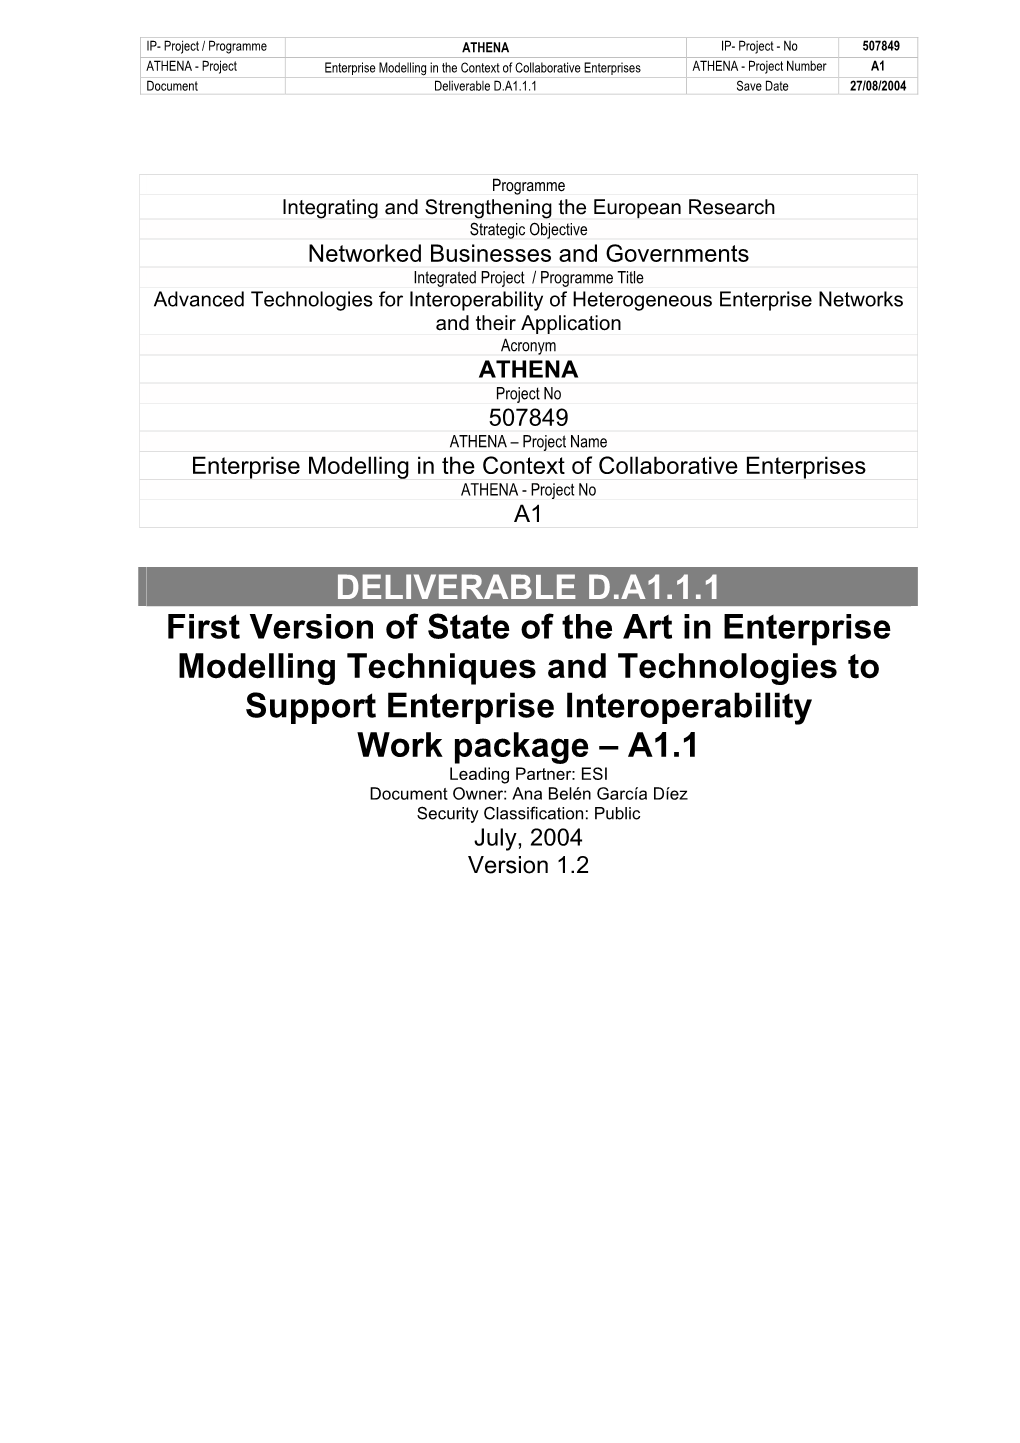 DELIVERABLE D.A1.1.1 First Version of State of the Art in Enterprise